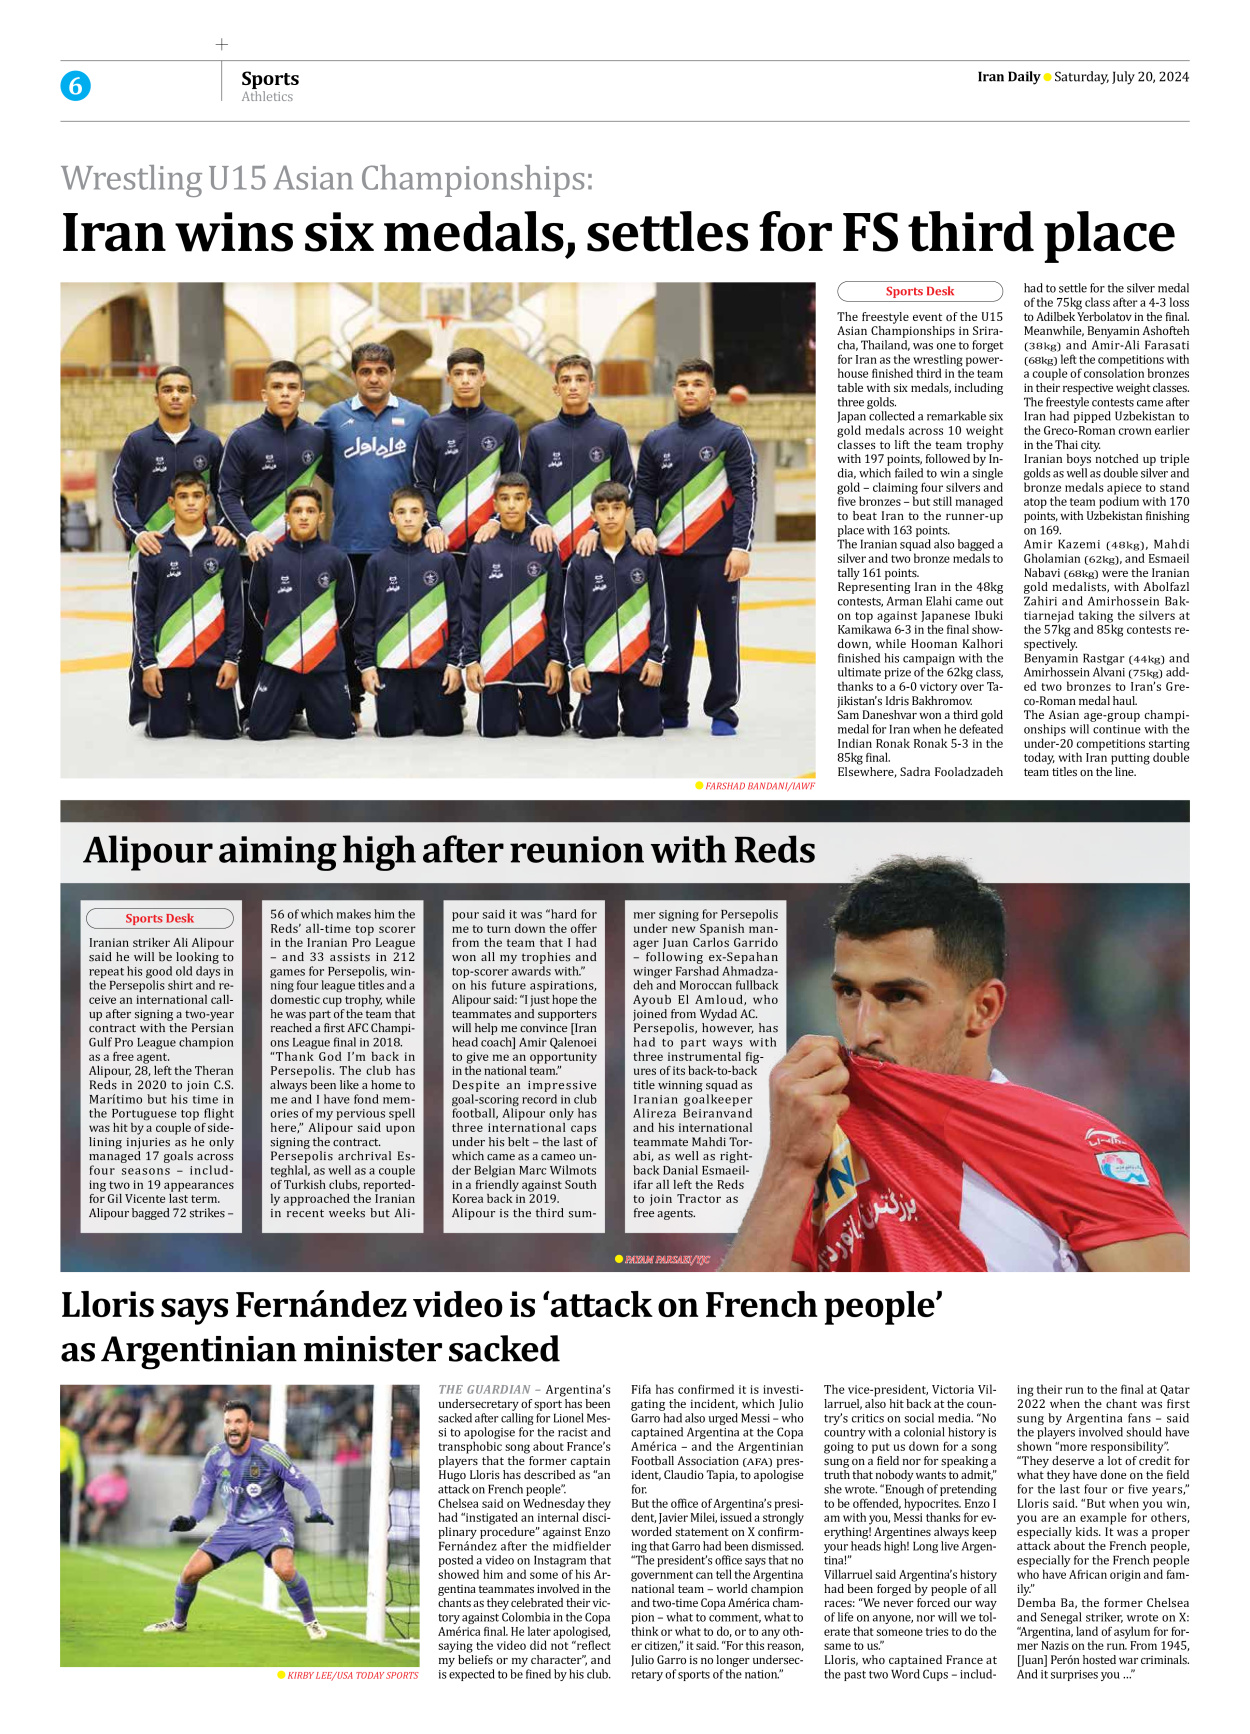 Iran Daily - Number Seven Thousand Six Hundred and Seven - 20 July 2024 - Page 6